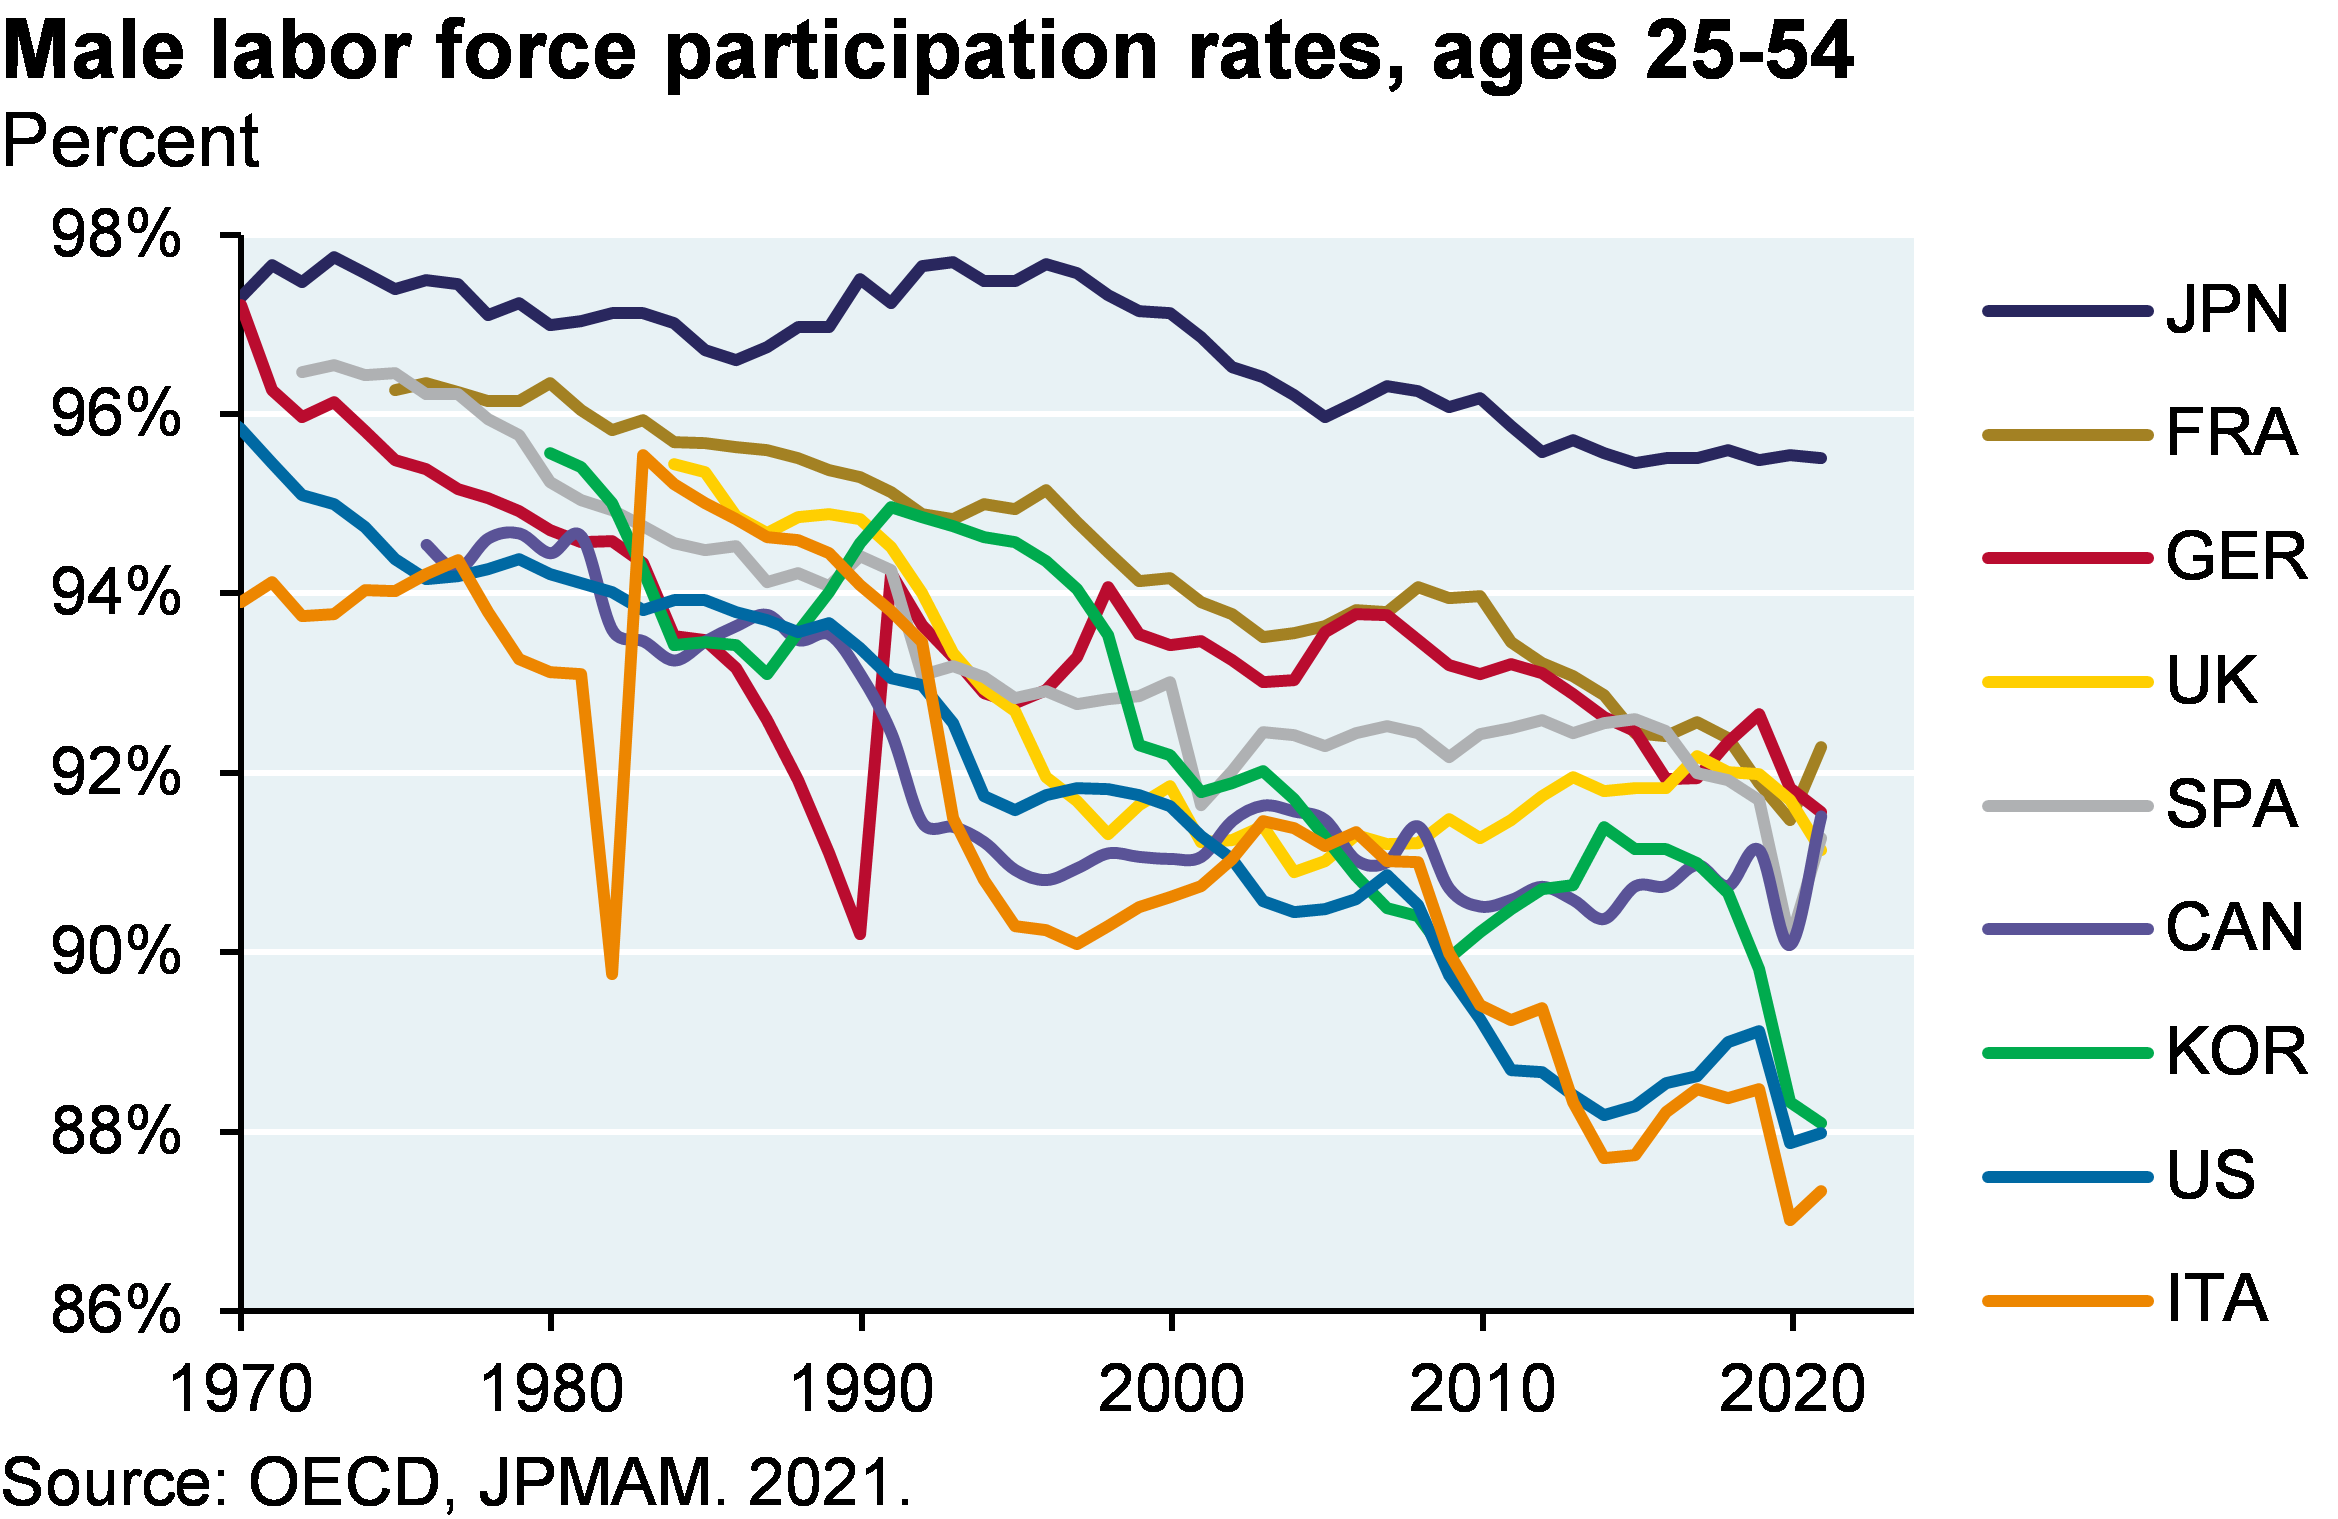 Line chart shows male labor force participation rates (ages 25 to 54) amongst various countries from 1970 to now. The line chart illustrates that the United States not only had one of the largest declines amongst the group, but is currently at one of the lowest levels. 